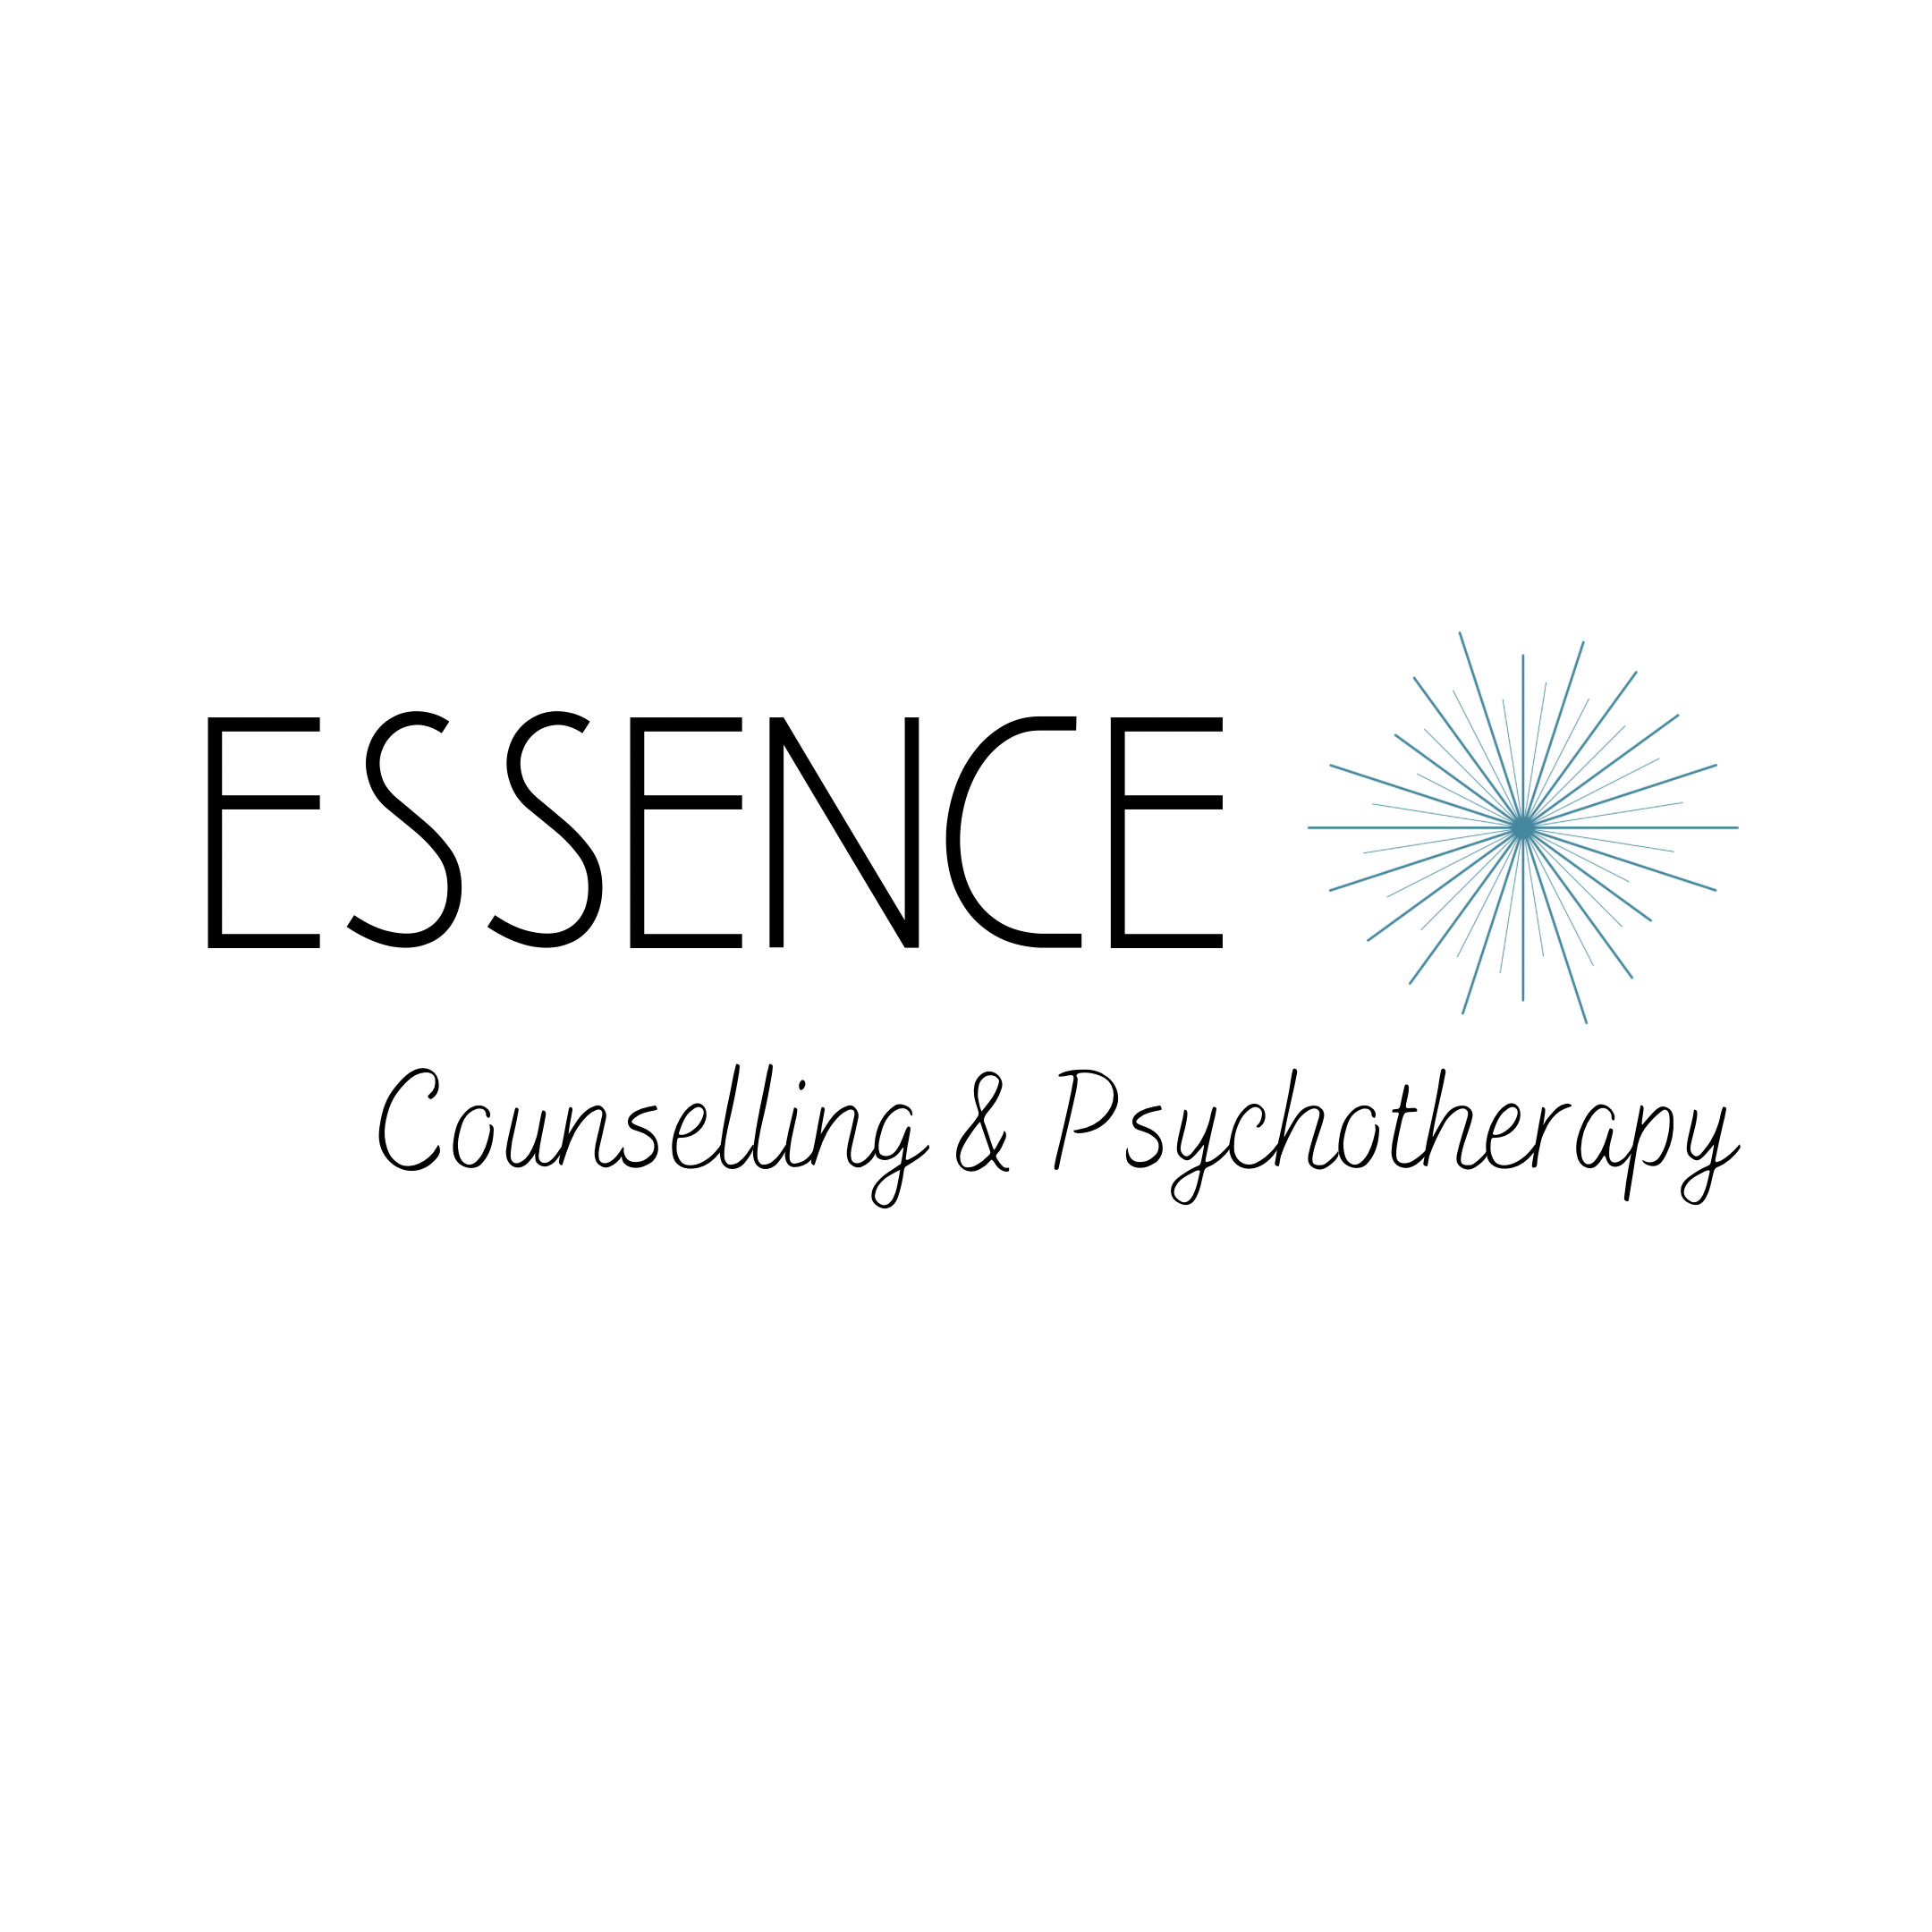 Esscence Counselling & Psychotherapy